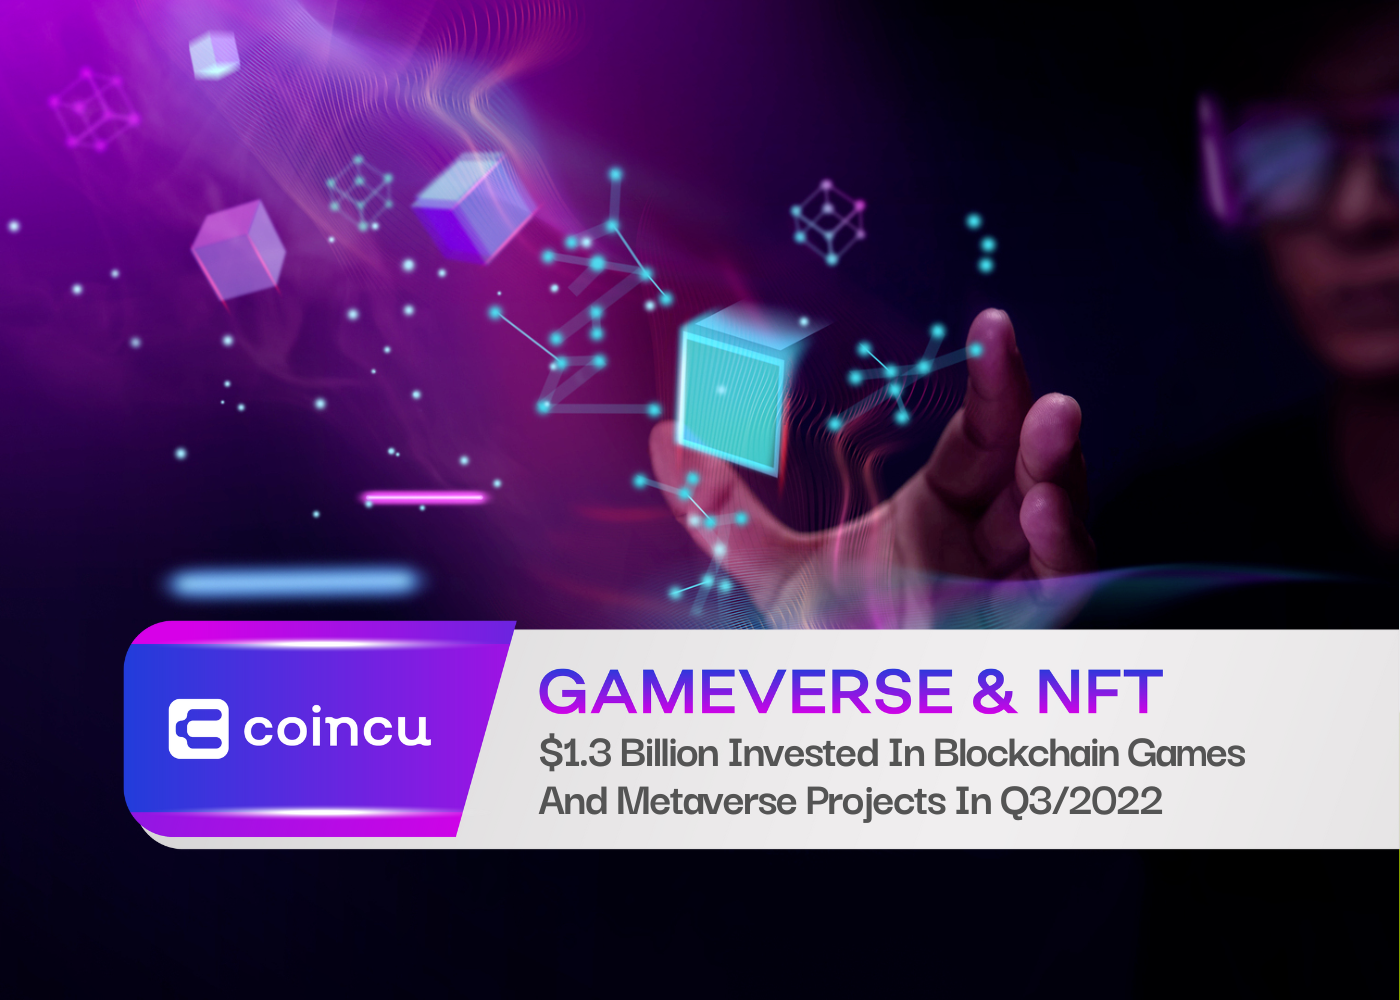 $1.3 Billion Invested In Blockchain Games And Metaverse Projects In Q3/2022